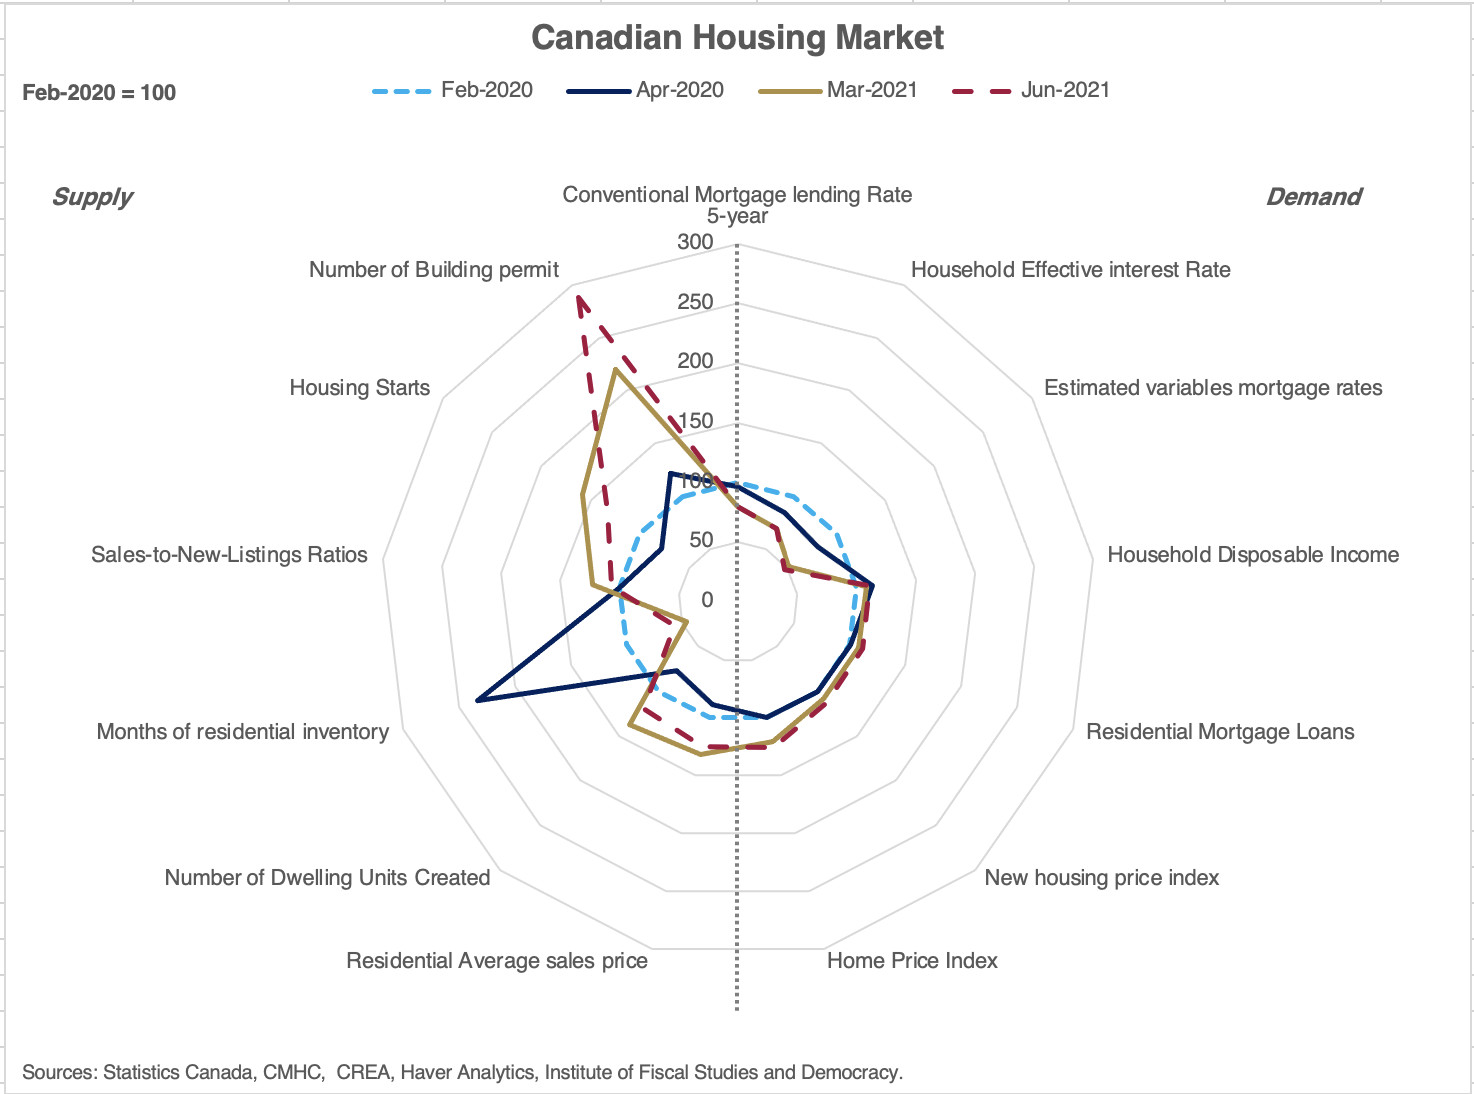 Canadian Housing Market Challenged by Pandemic Jolts: A year-long indicator analysis